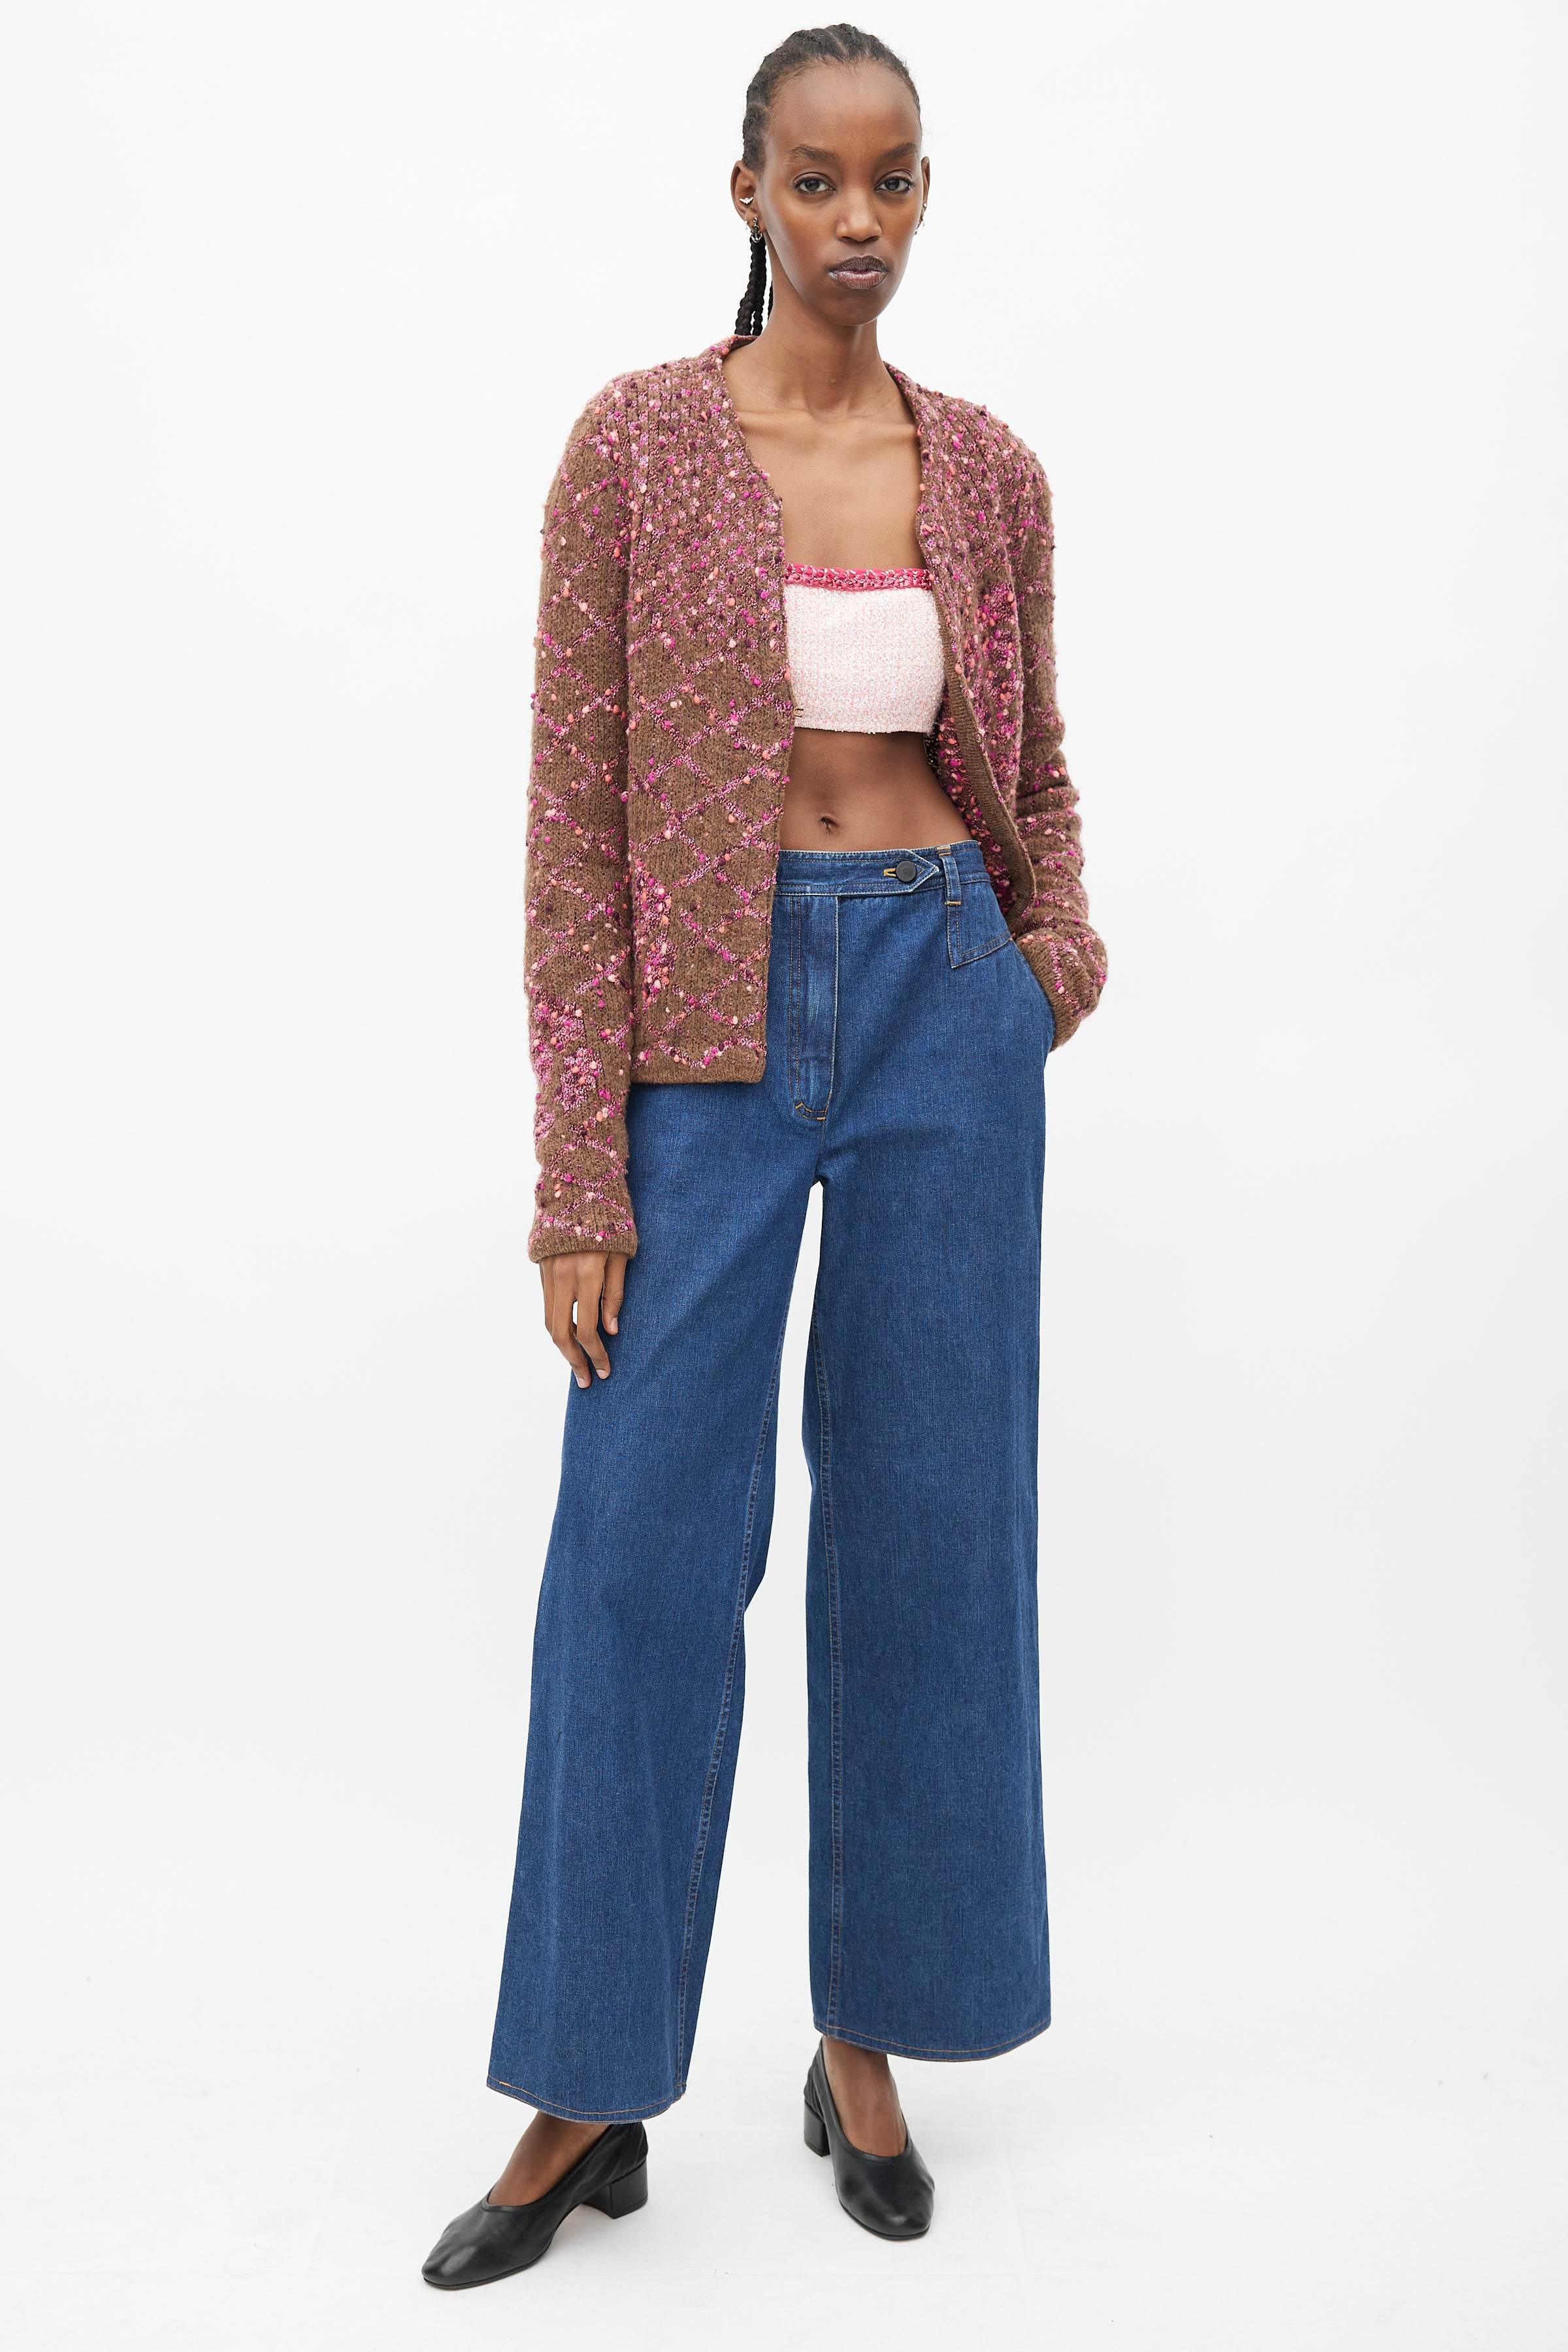 Chanel // Cruise 2021 Pink Tweed Crop Top – VSP Consignment